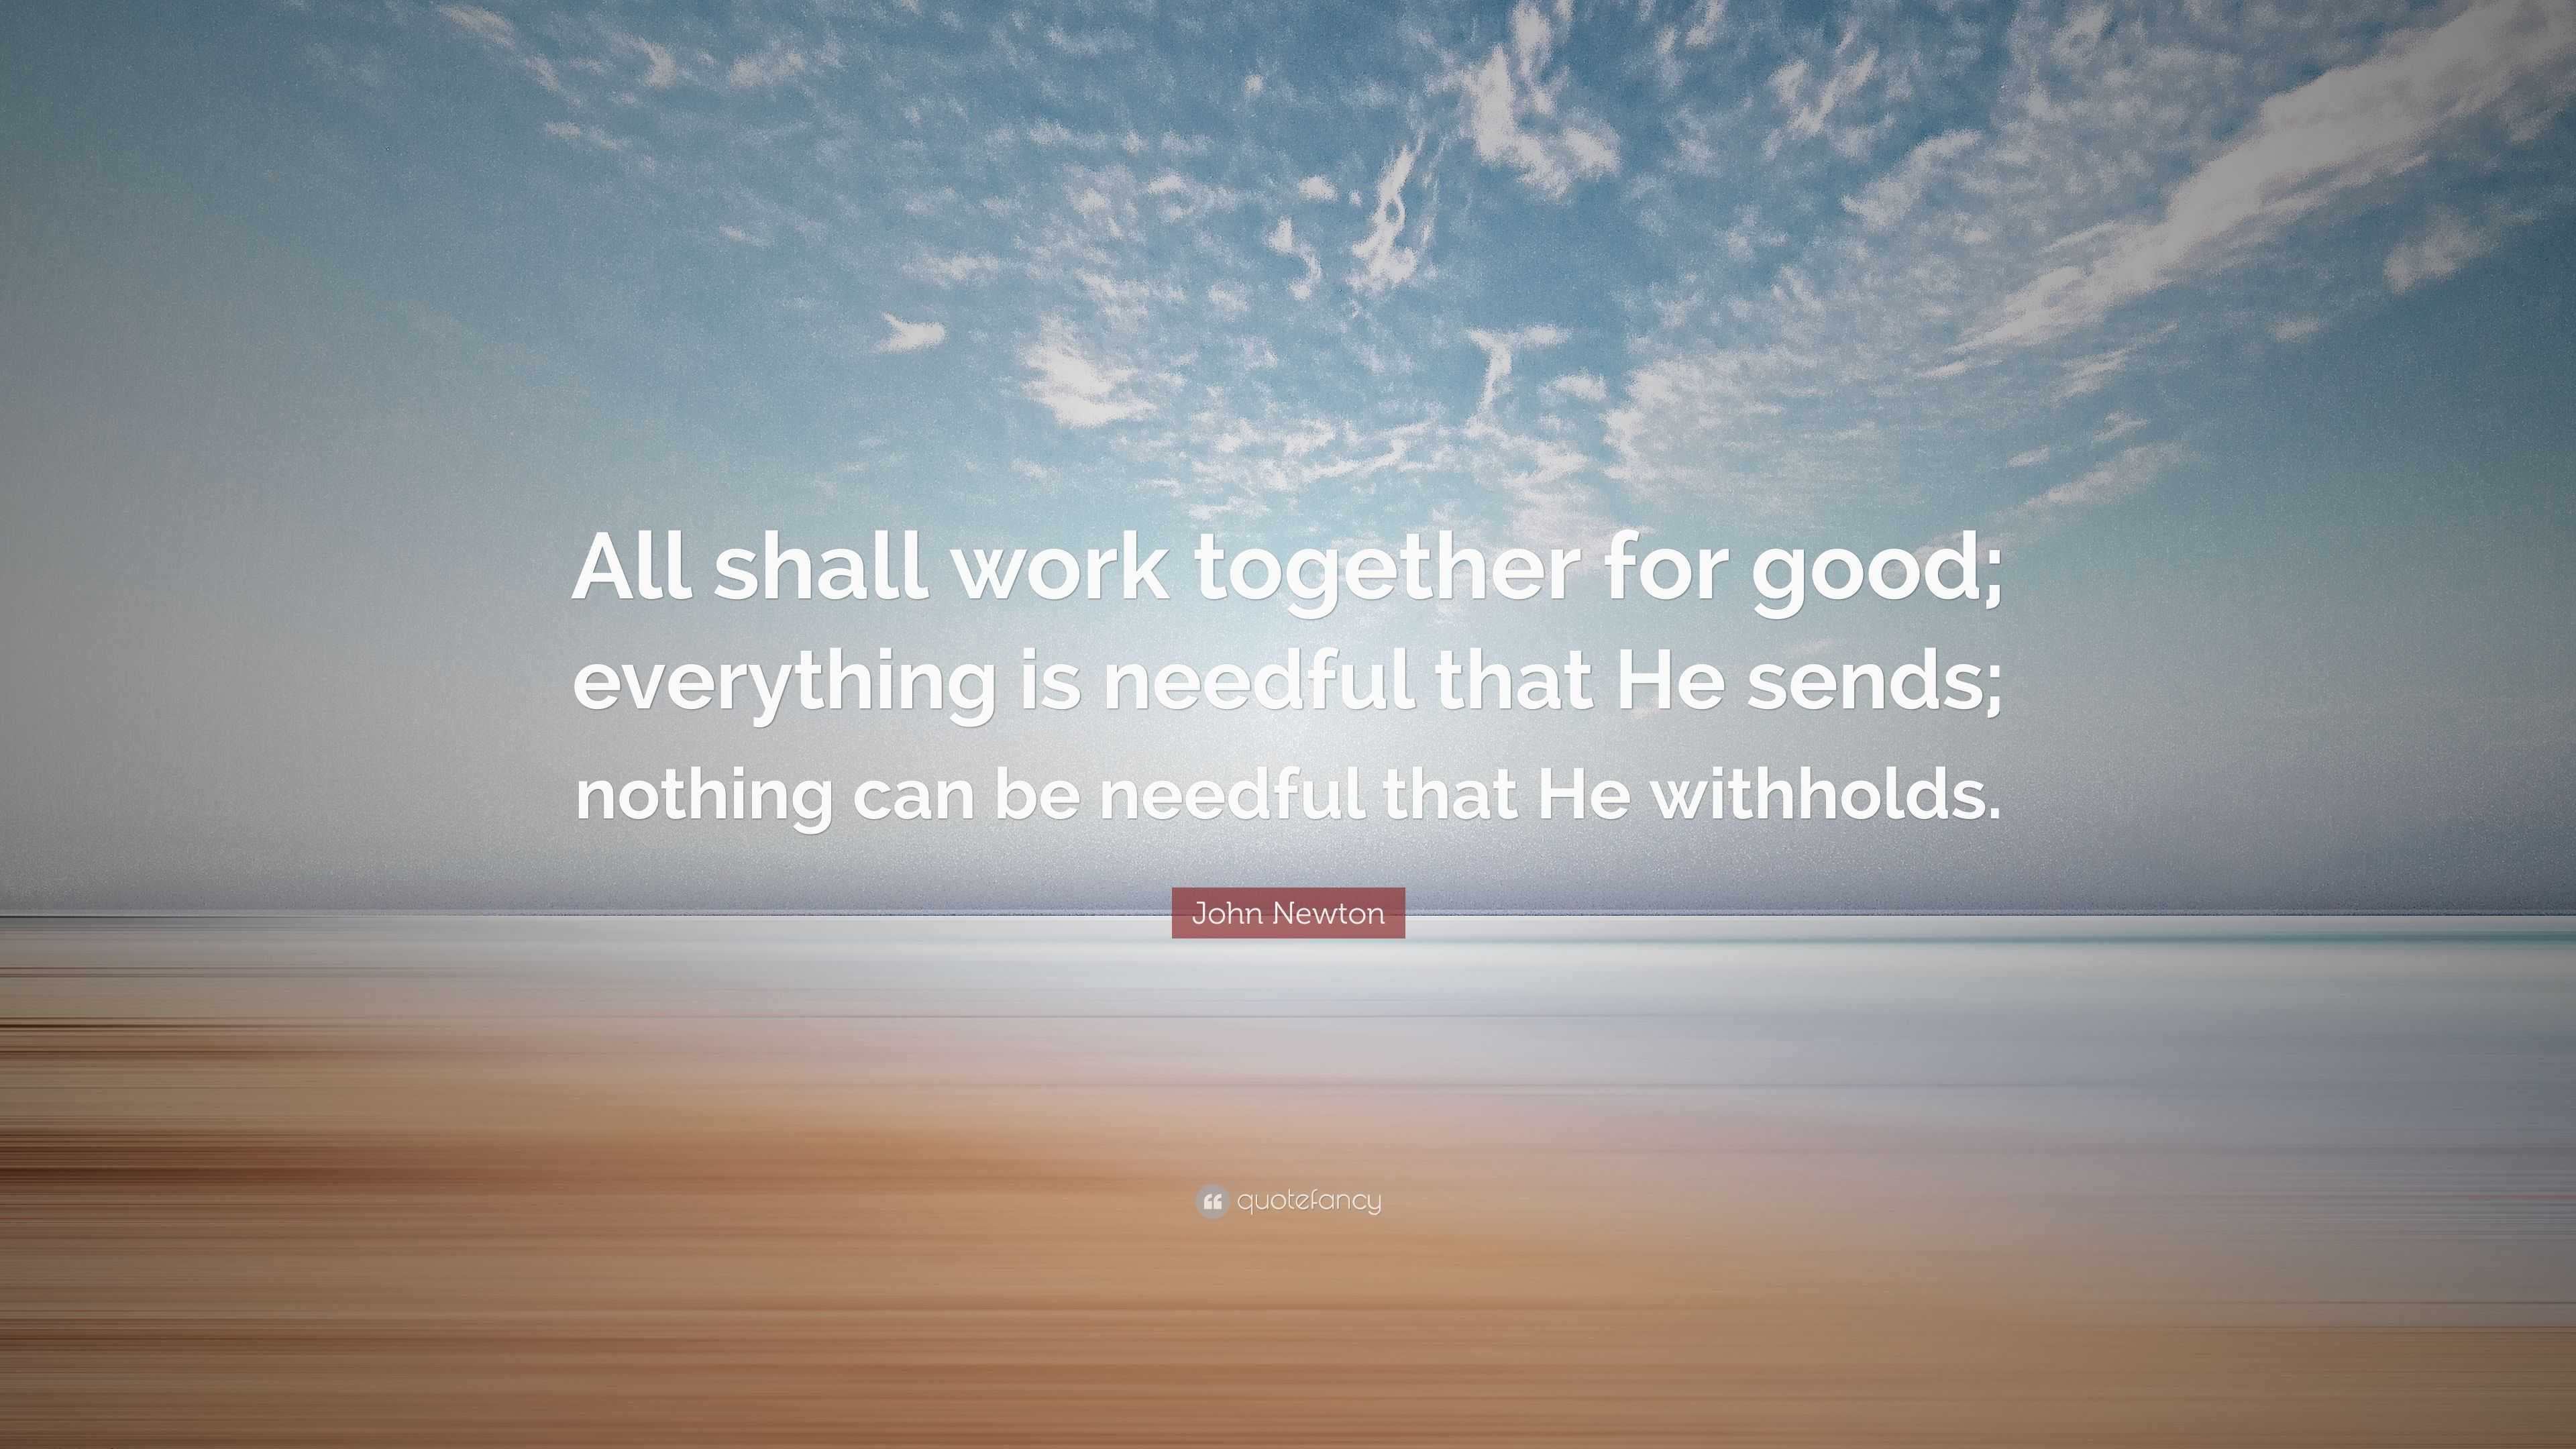 John Newton Quote: “All shall work together for good; everything is ...